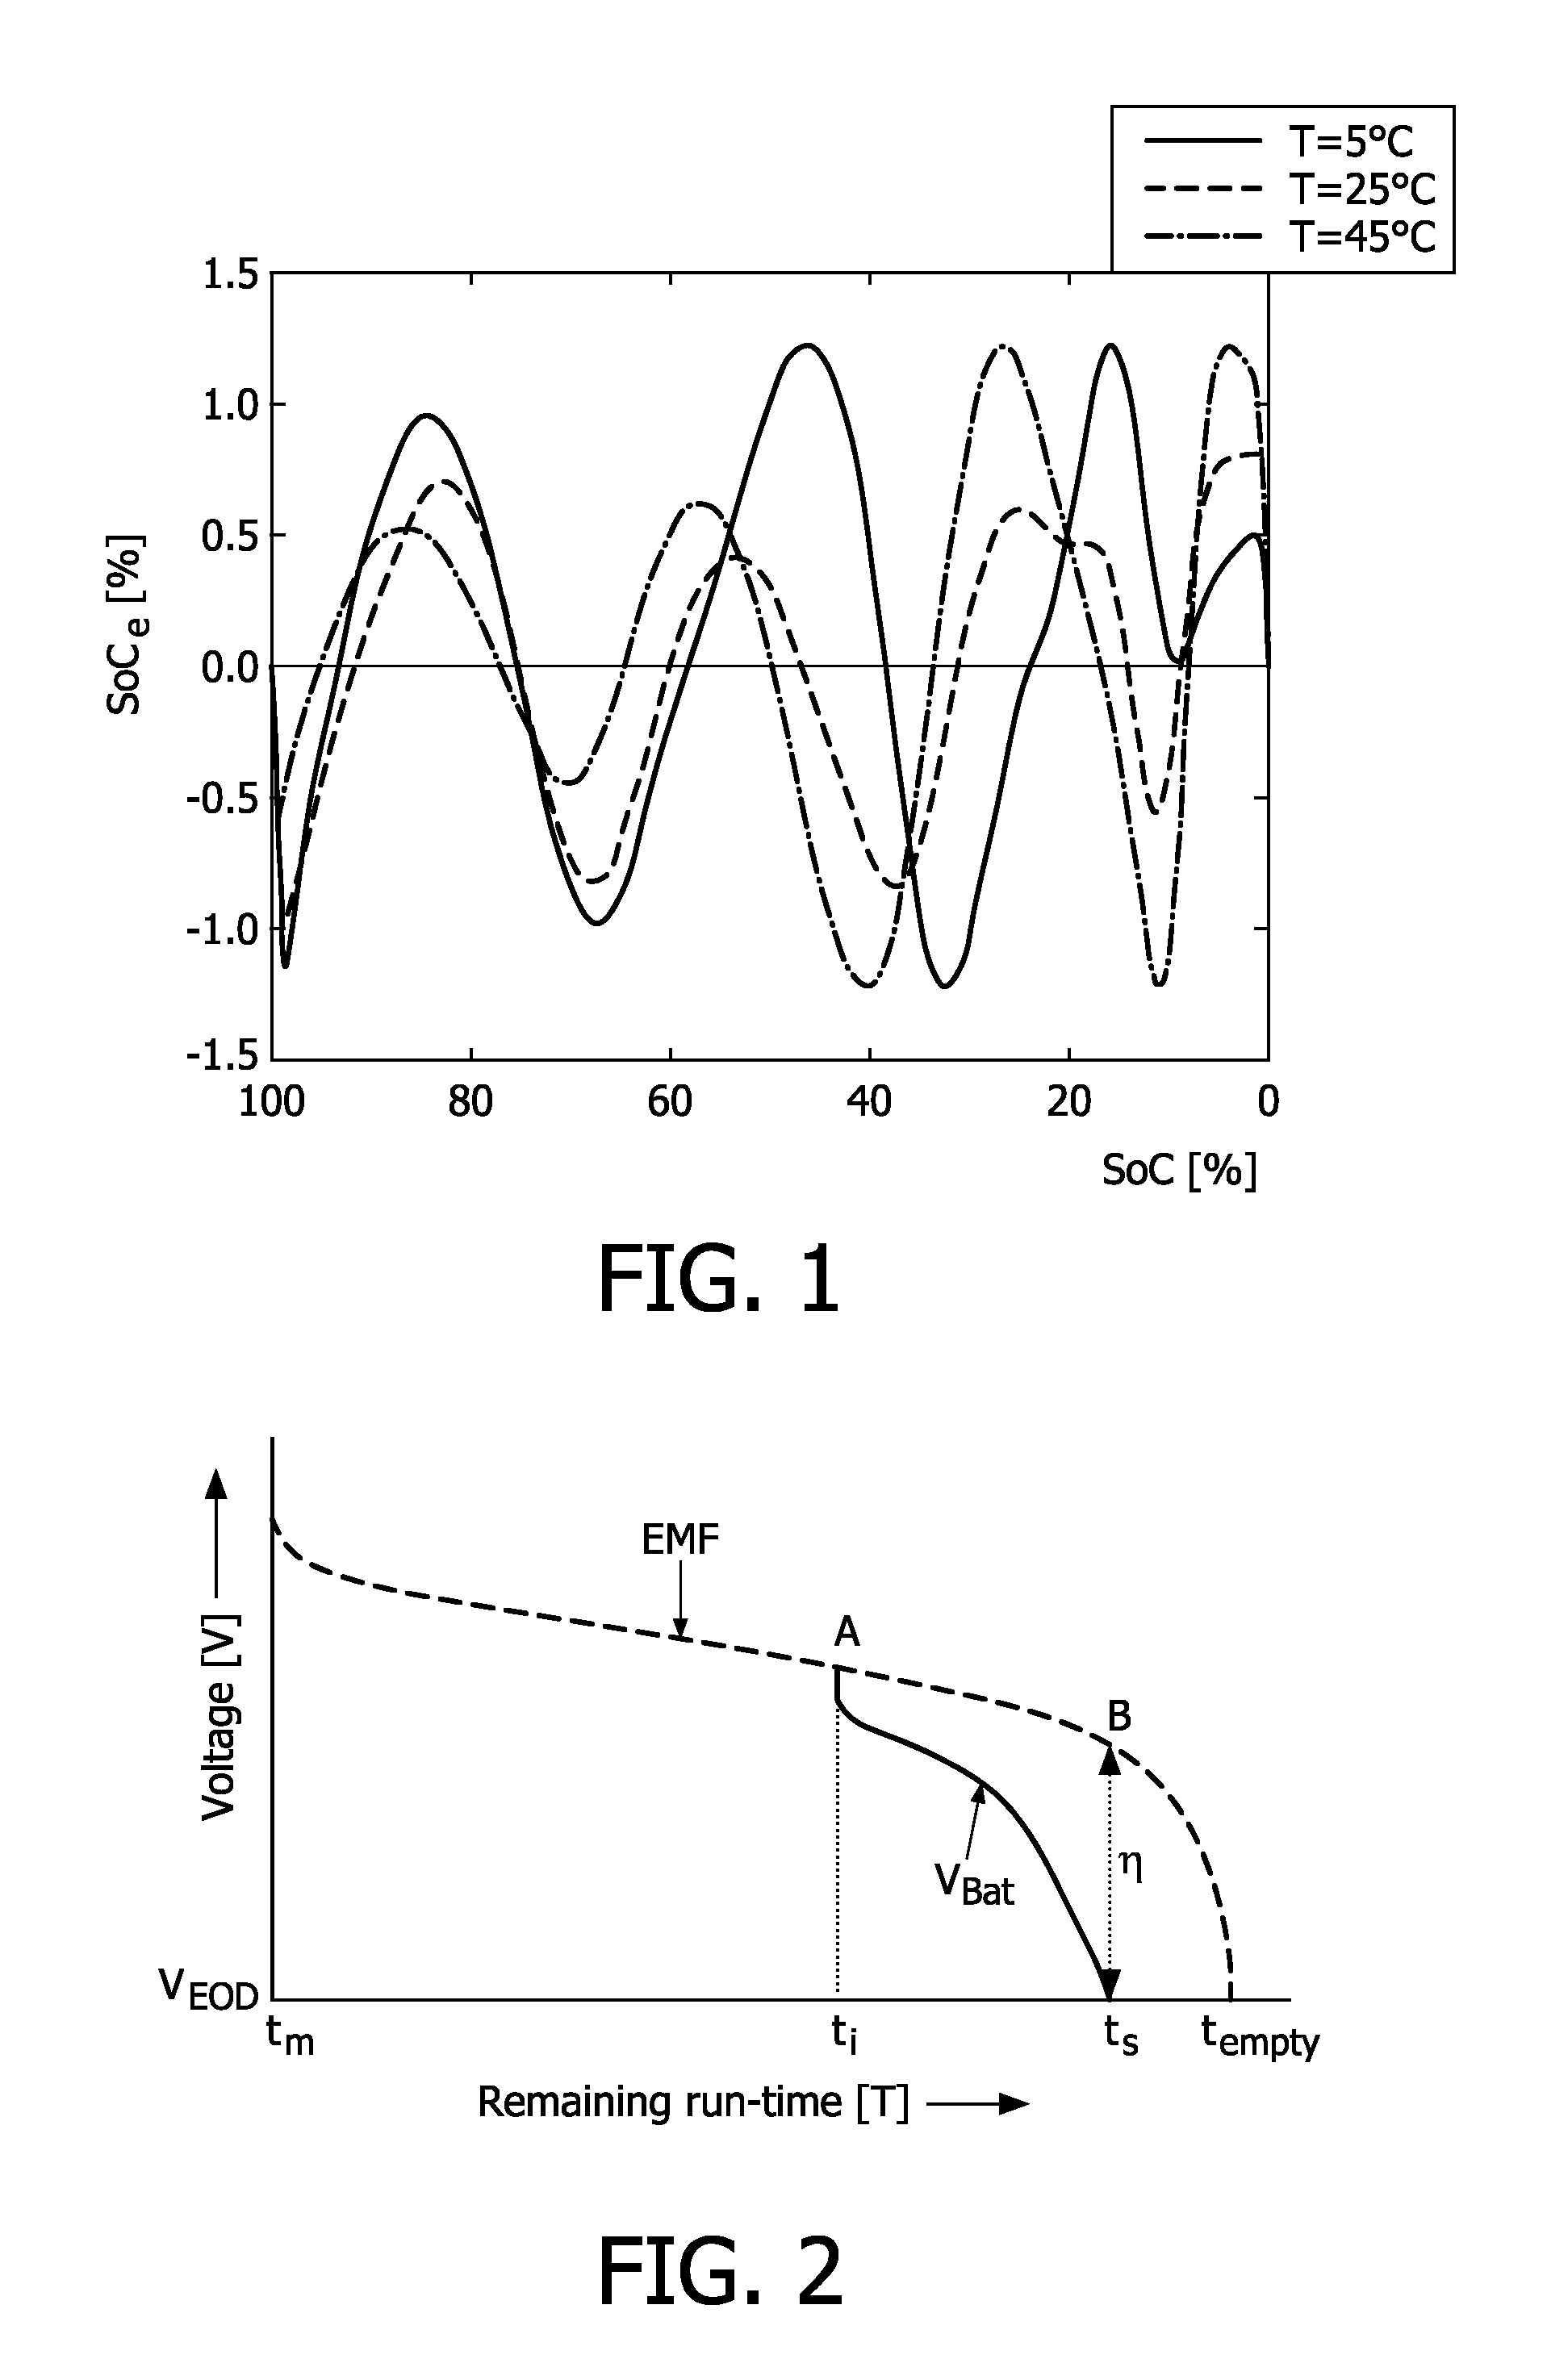 Method and apparatus for determination of the state-of-charge (SOC) of a rechargeable battery